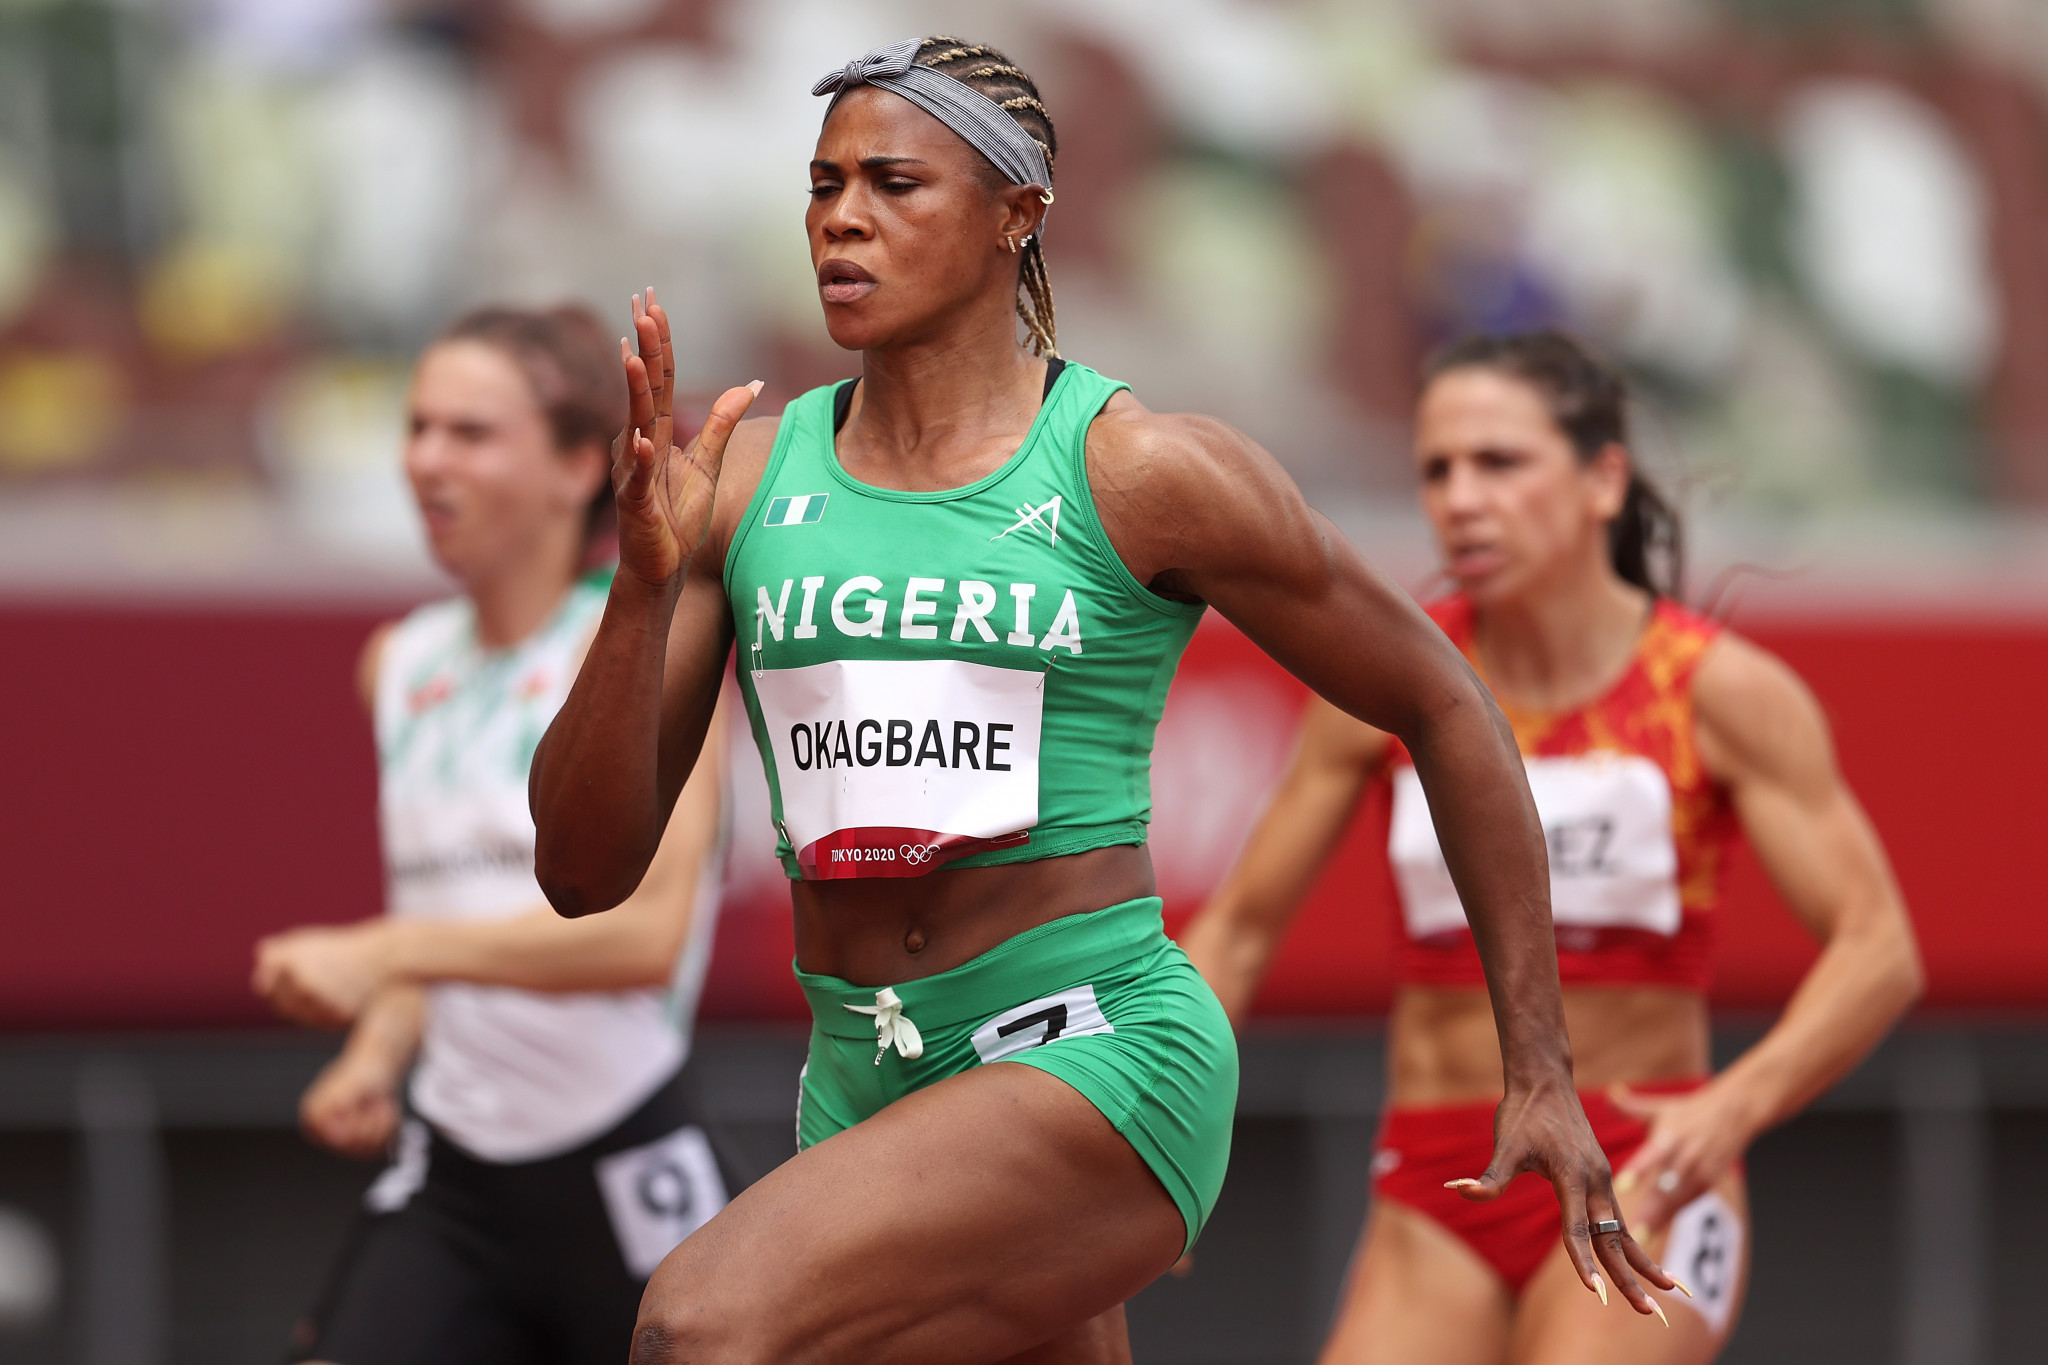 The Athletics Federation of Nigeria has denied allegations it abandoned Blessing Okagbare at Tokyo 2020 ©Getty Images